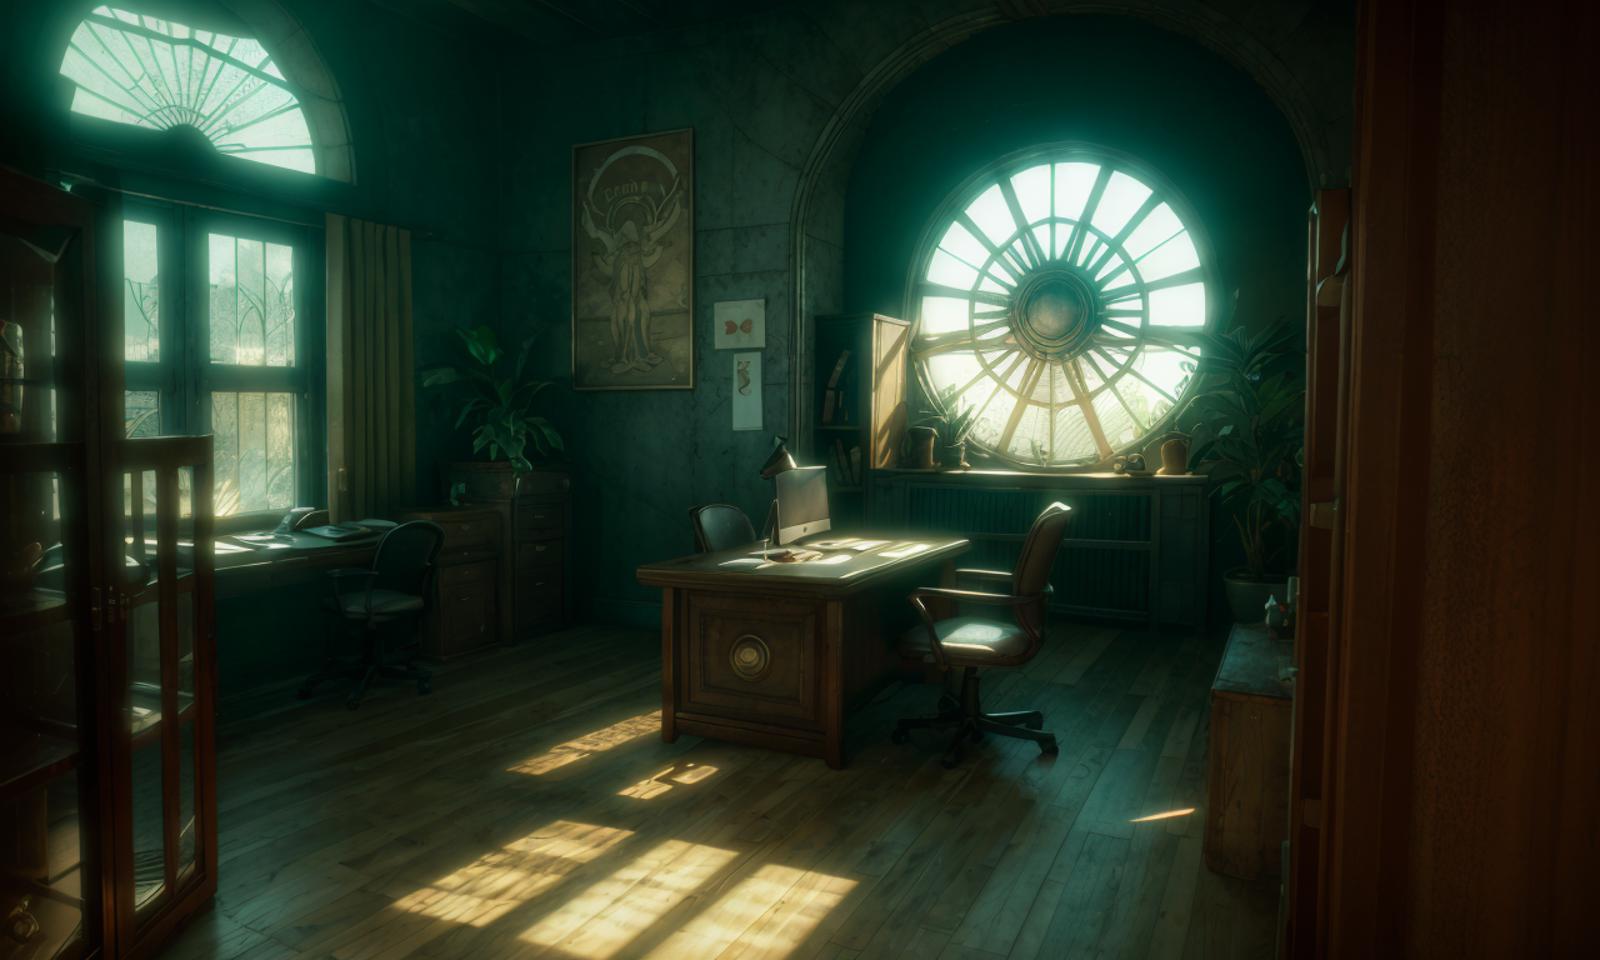 Bioshock Rapture Aesthetic image by Wolf_Systems